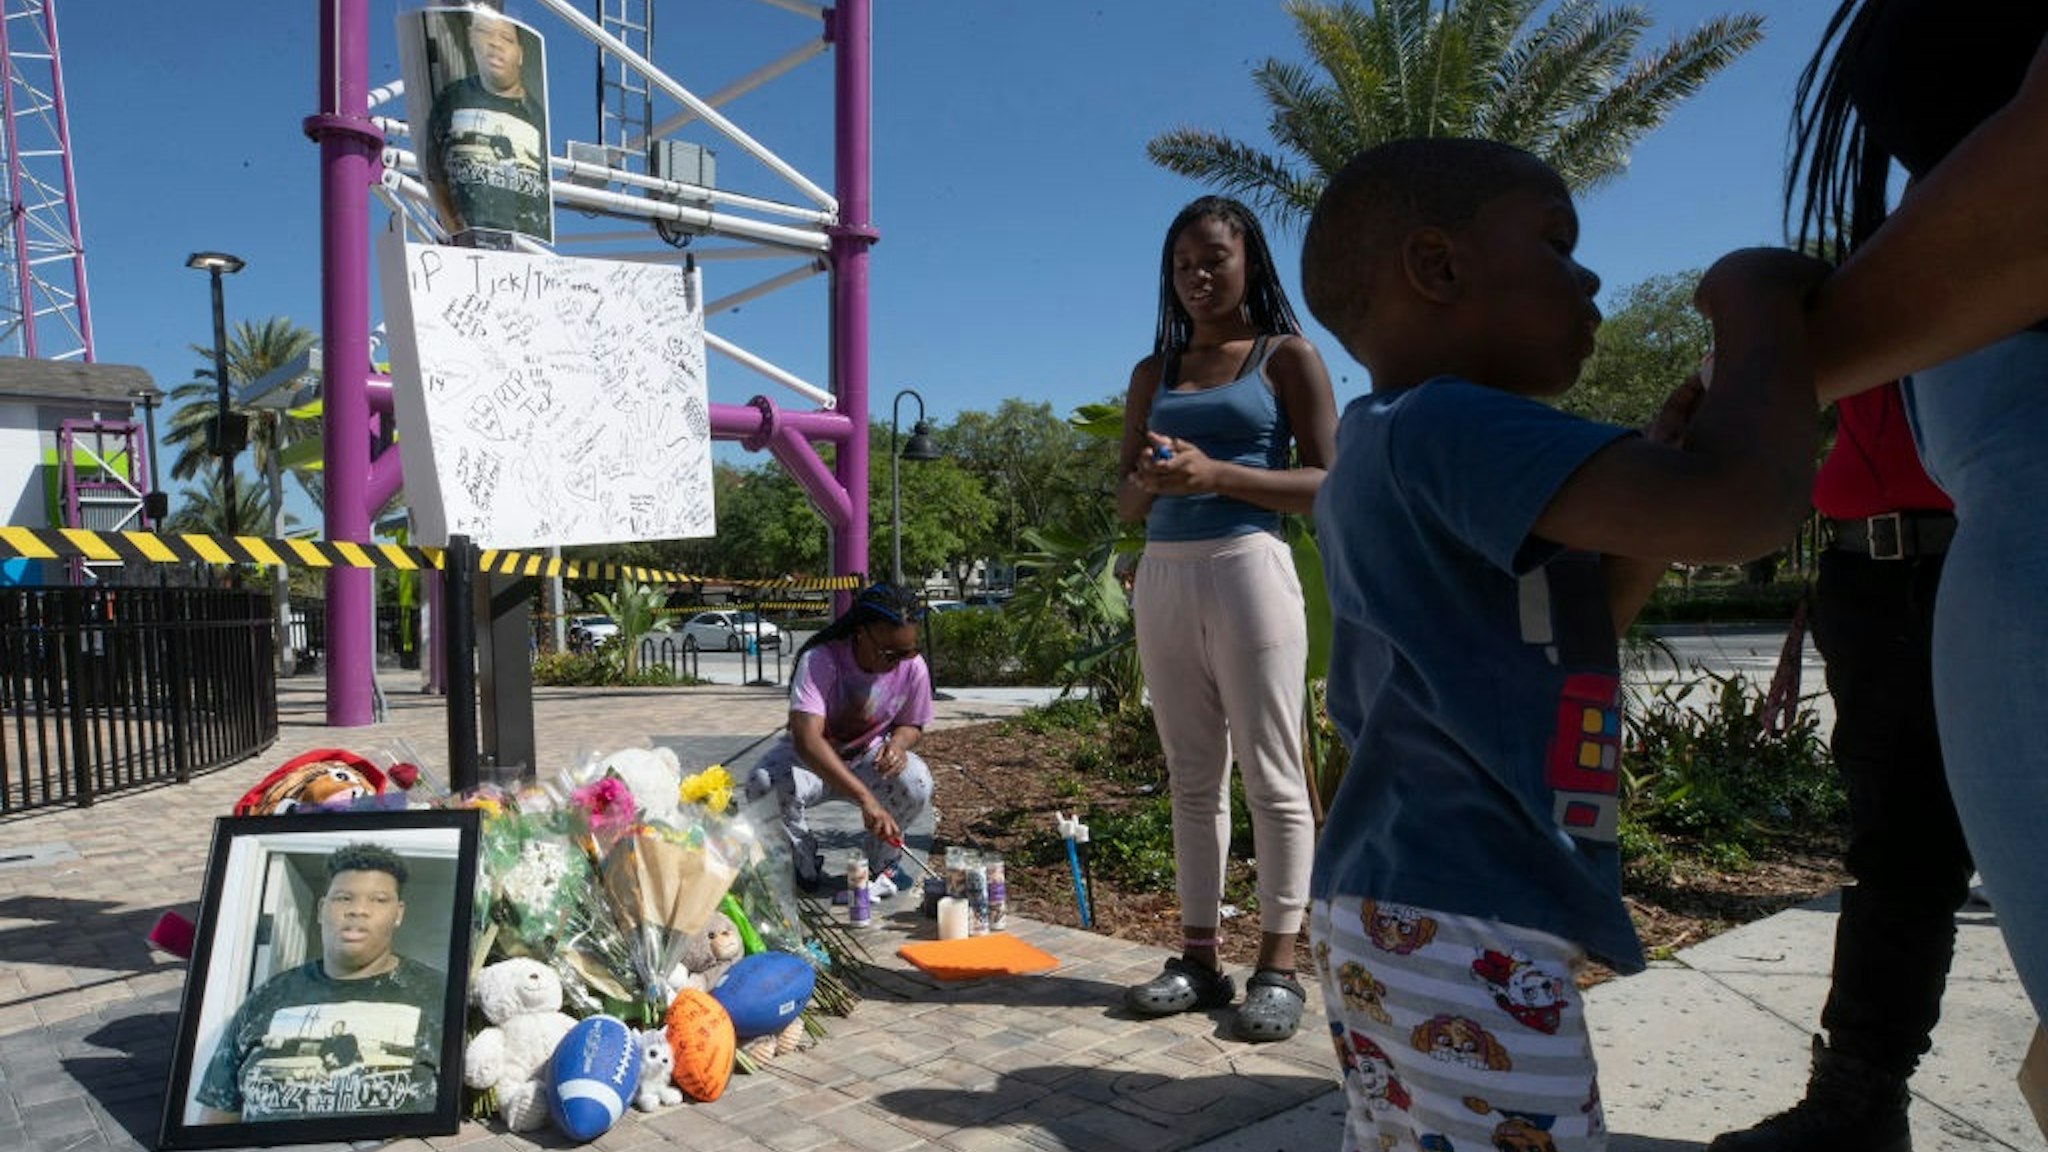 Visitors stand next to the memorial while a family member lights candles for Tyre Sampson, 14, who was killed when he fell from the Orlando Free Fall ride at ICON Park in Orlando, Florida, on Saturday, March 26, 2022.